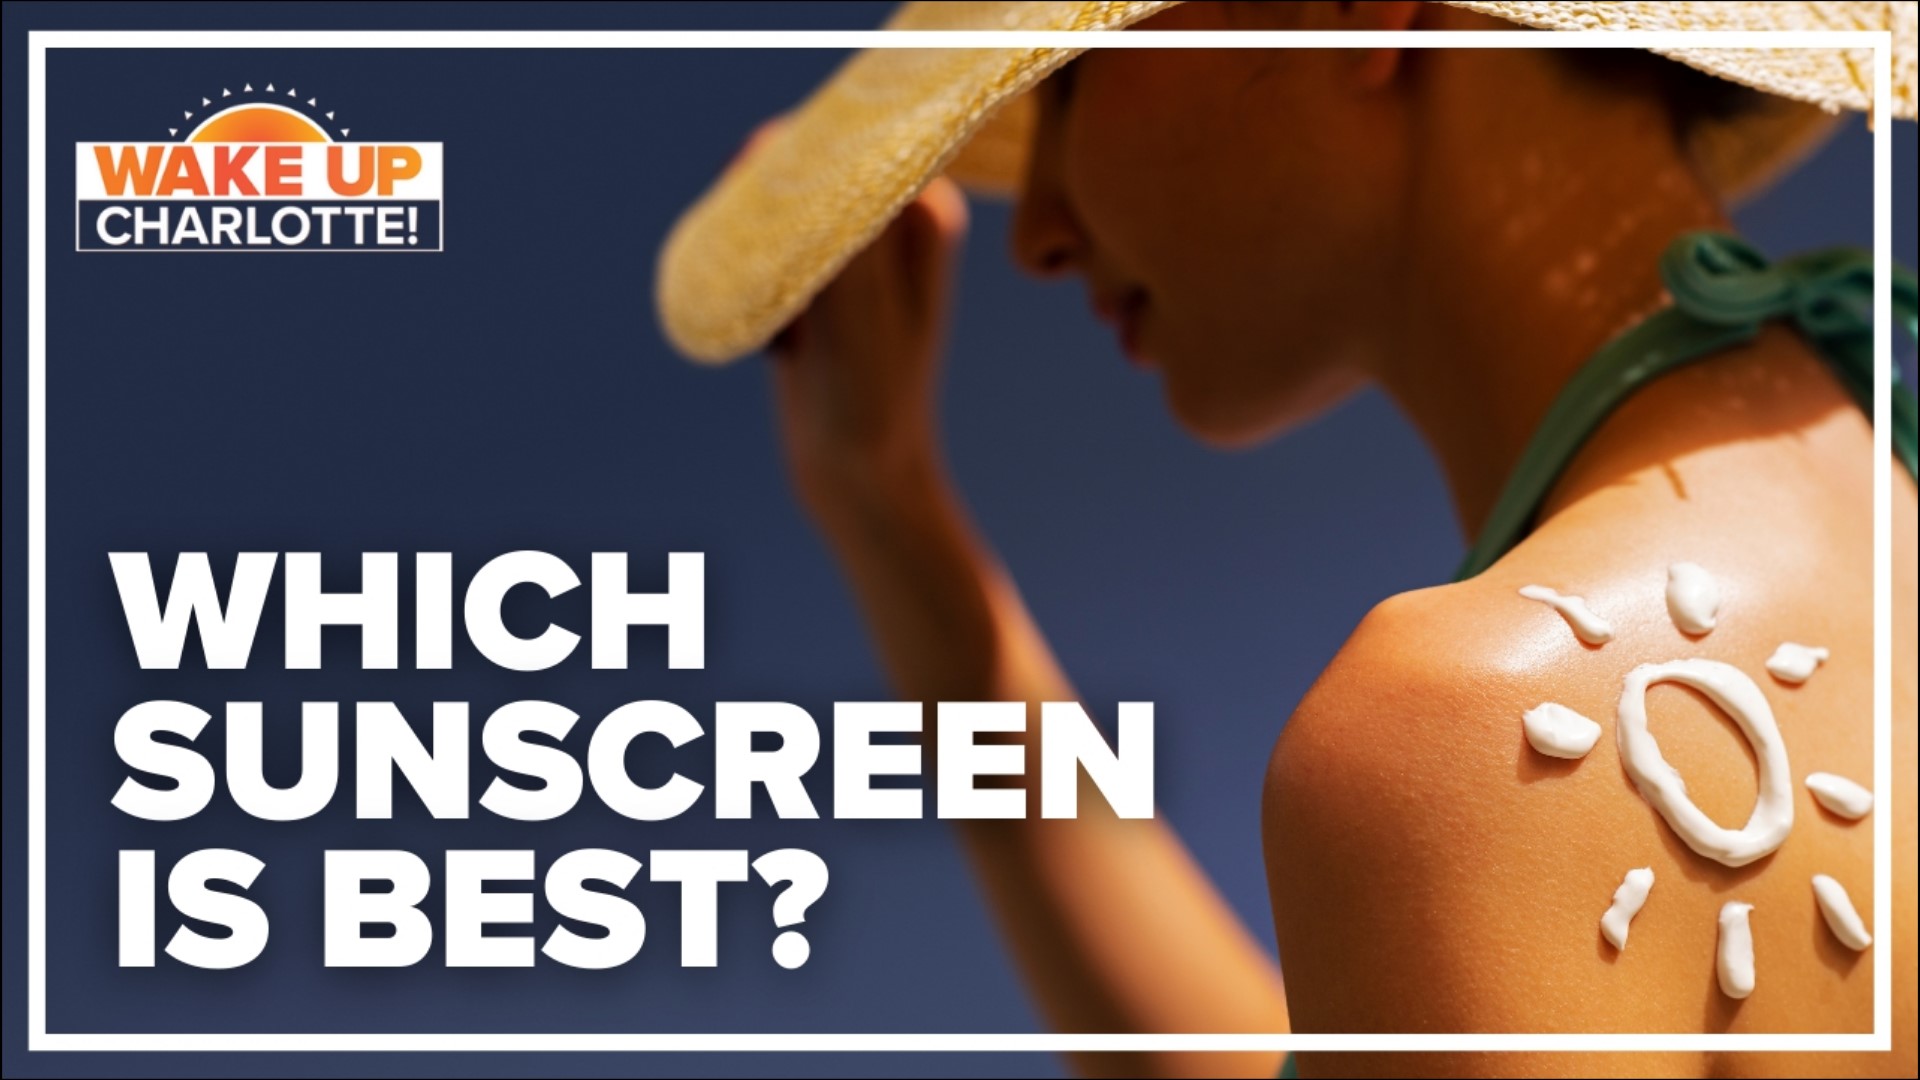 There's a wide range of SPF on sunscreen. But is a certain amount better than others?